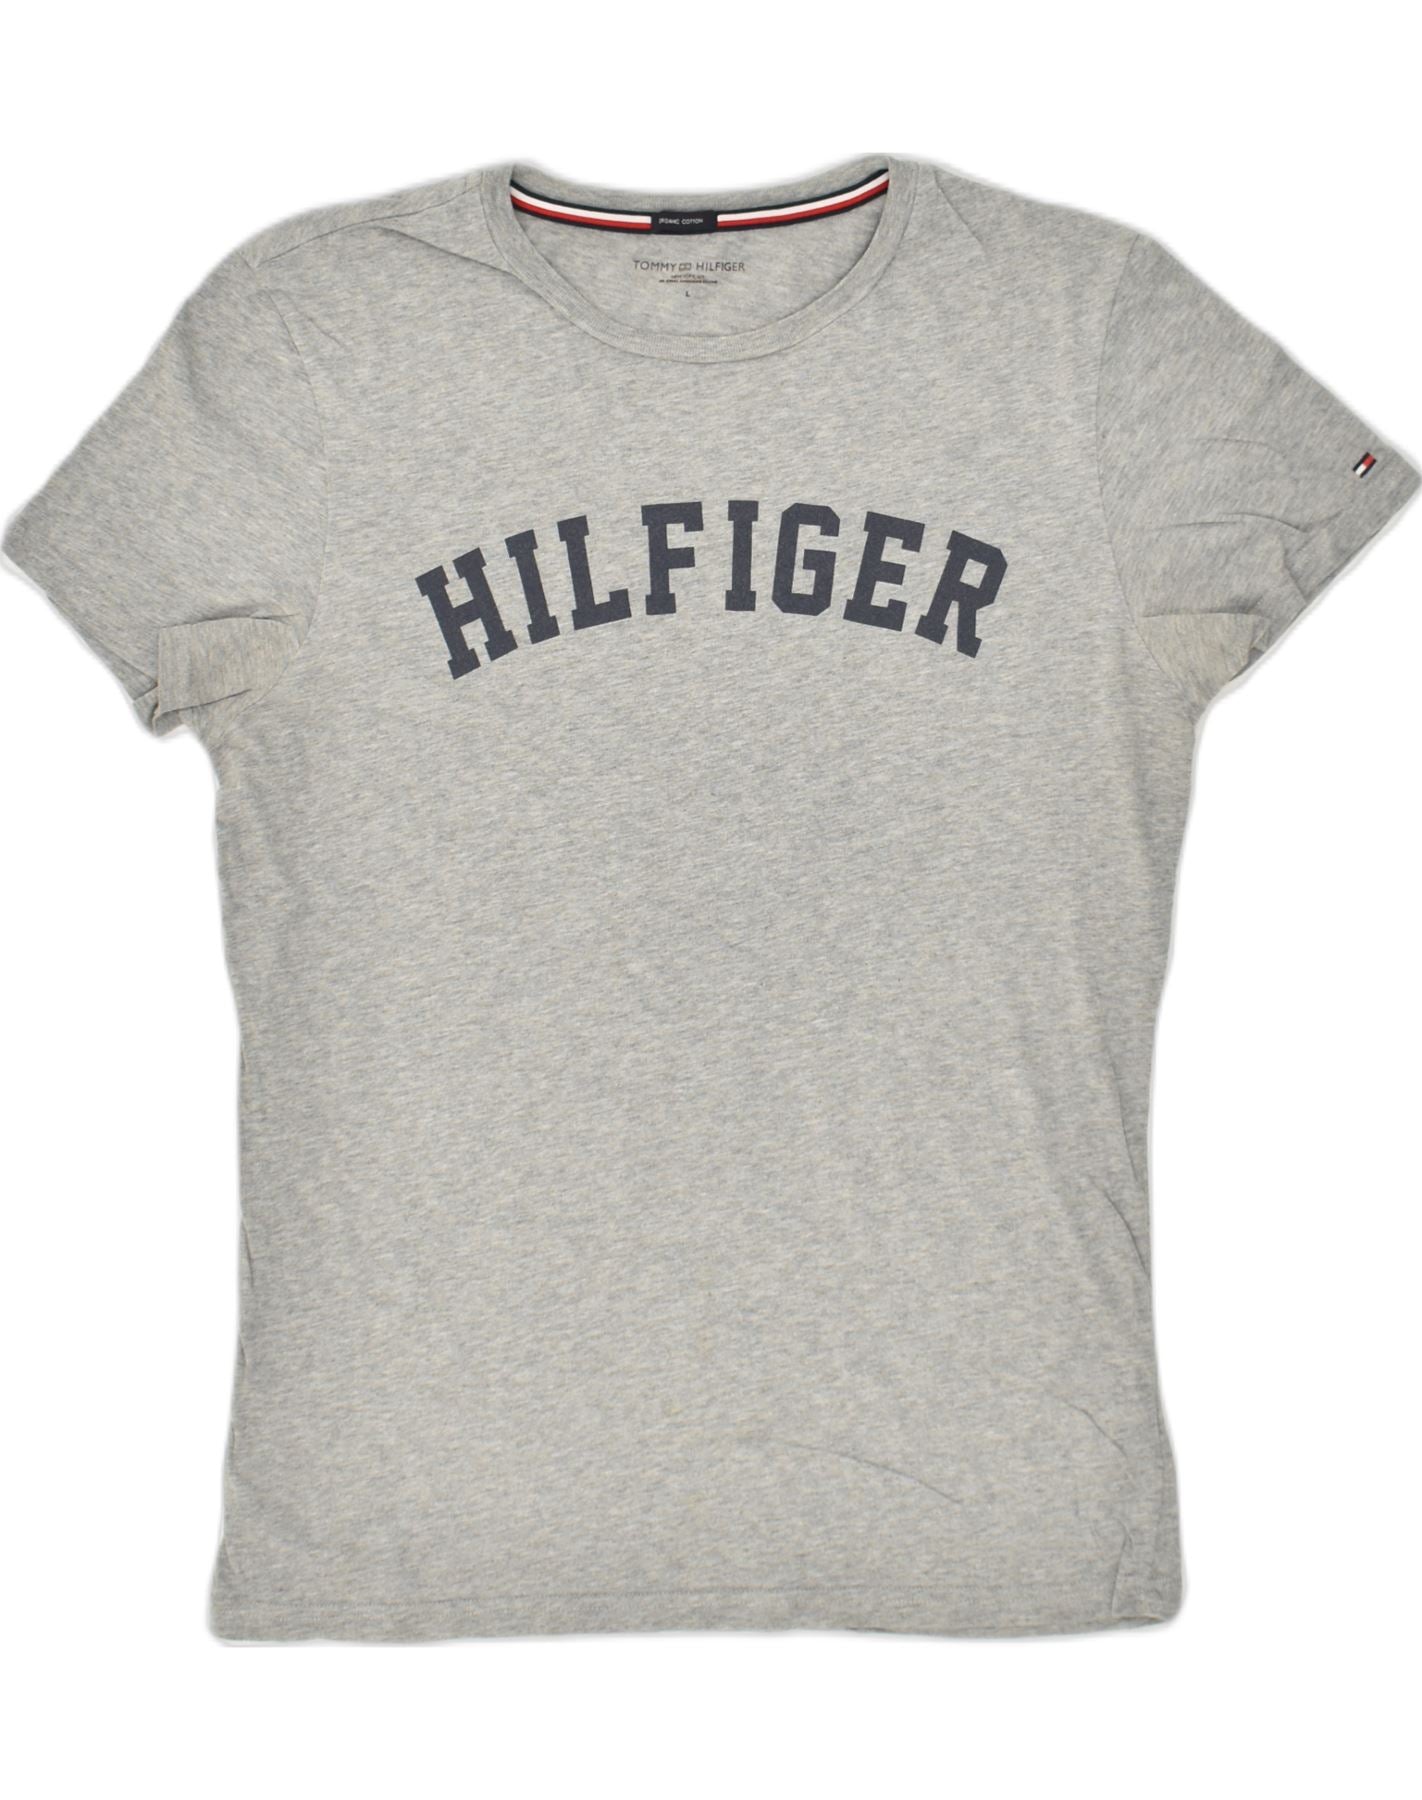 TOMMY HILFIGER Womens New York Graphic T-Shirt Top UK 14 Large Grey Cotton, Vintage & Second-Hand Clothing Online